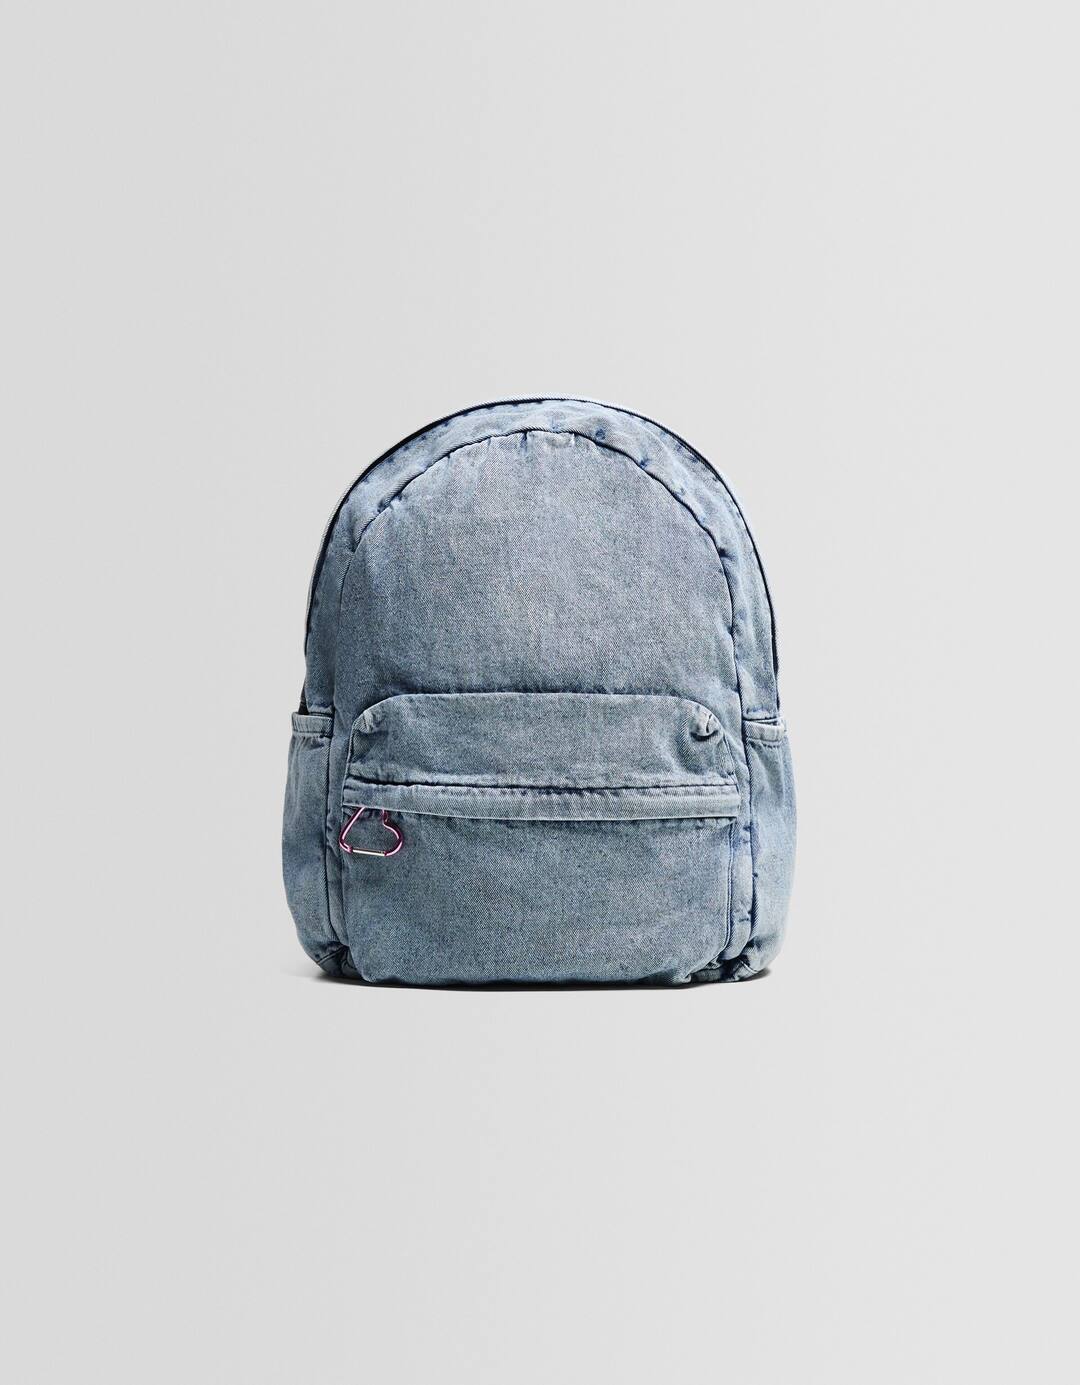 Denim backpack with heart charm